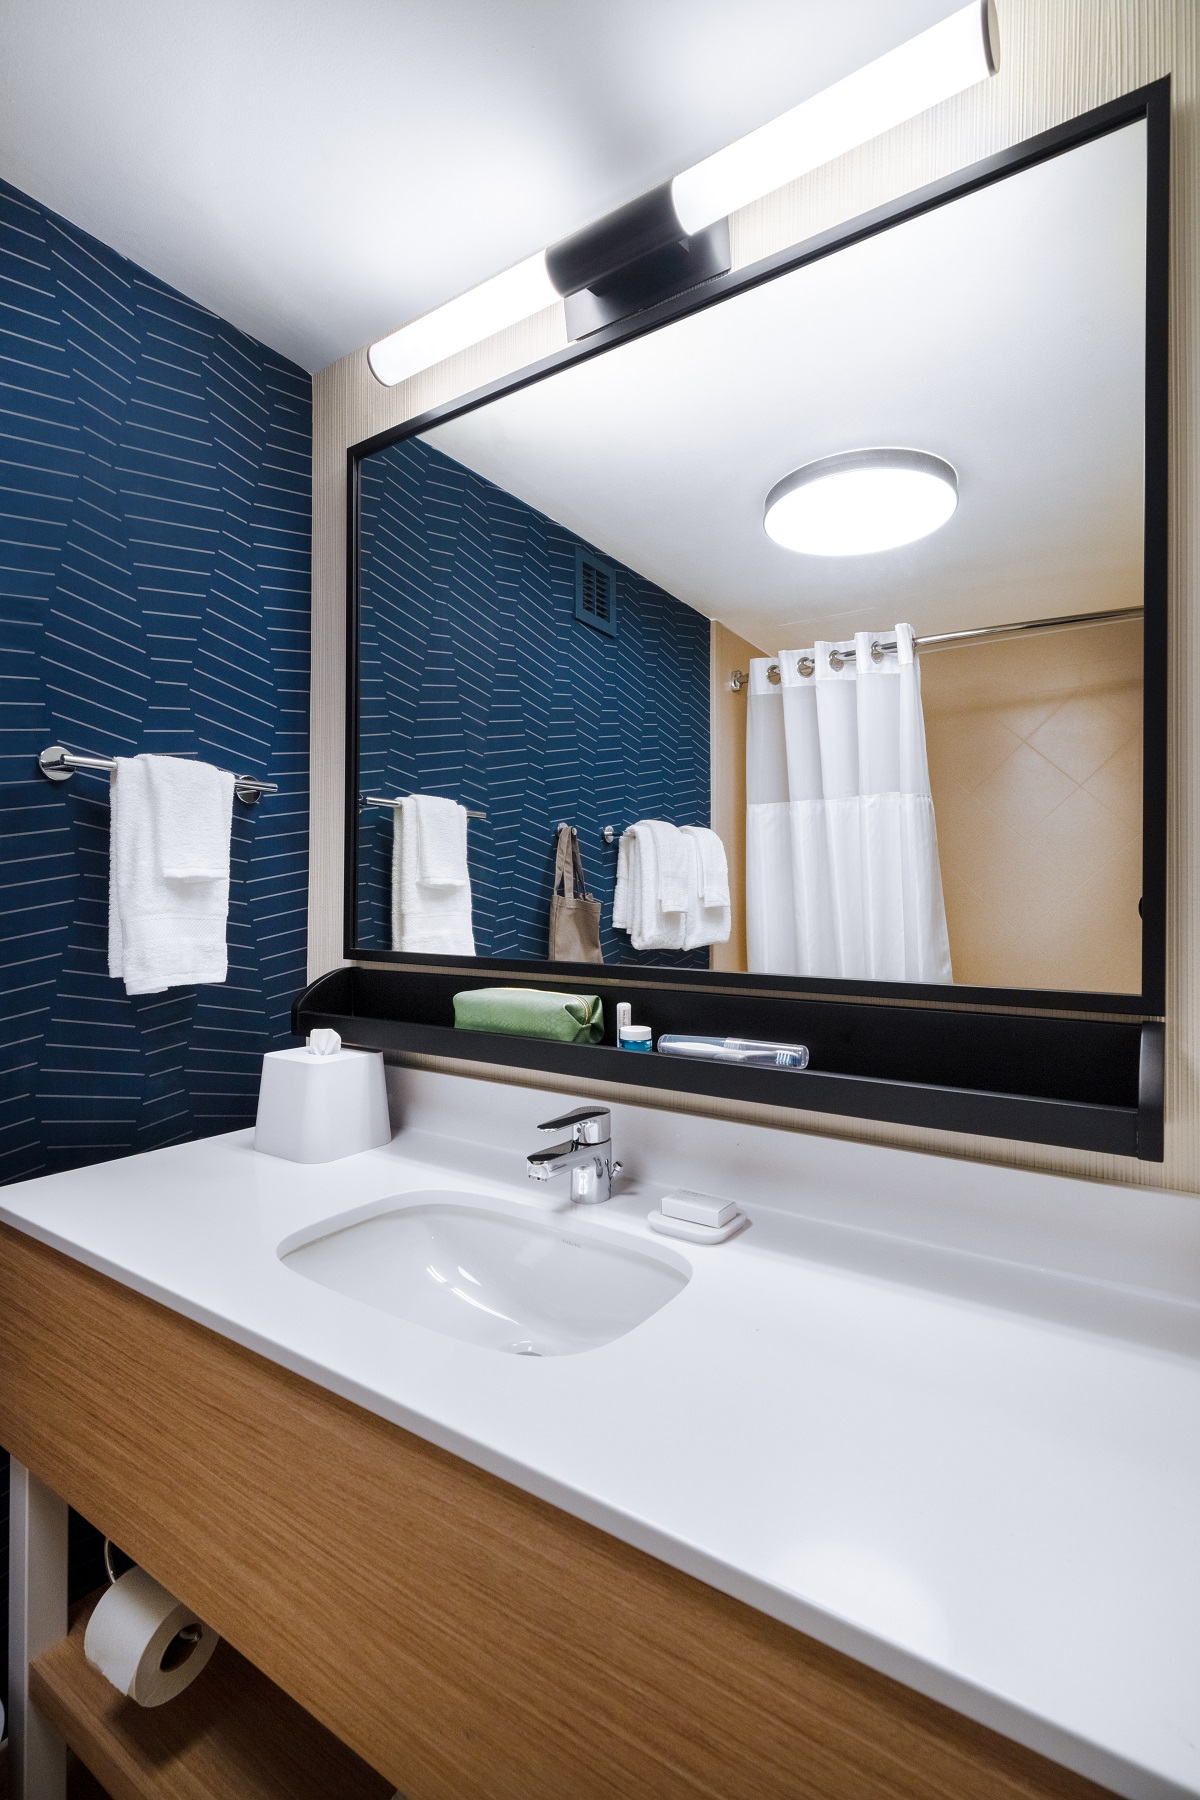 Spark by Hilton bathroom with blue tiles and wood and white surfaces